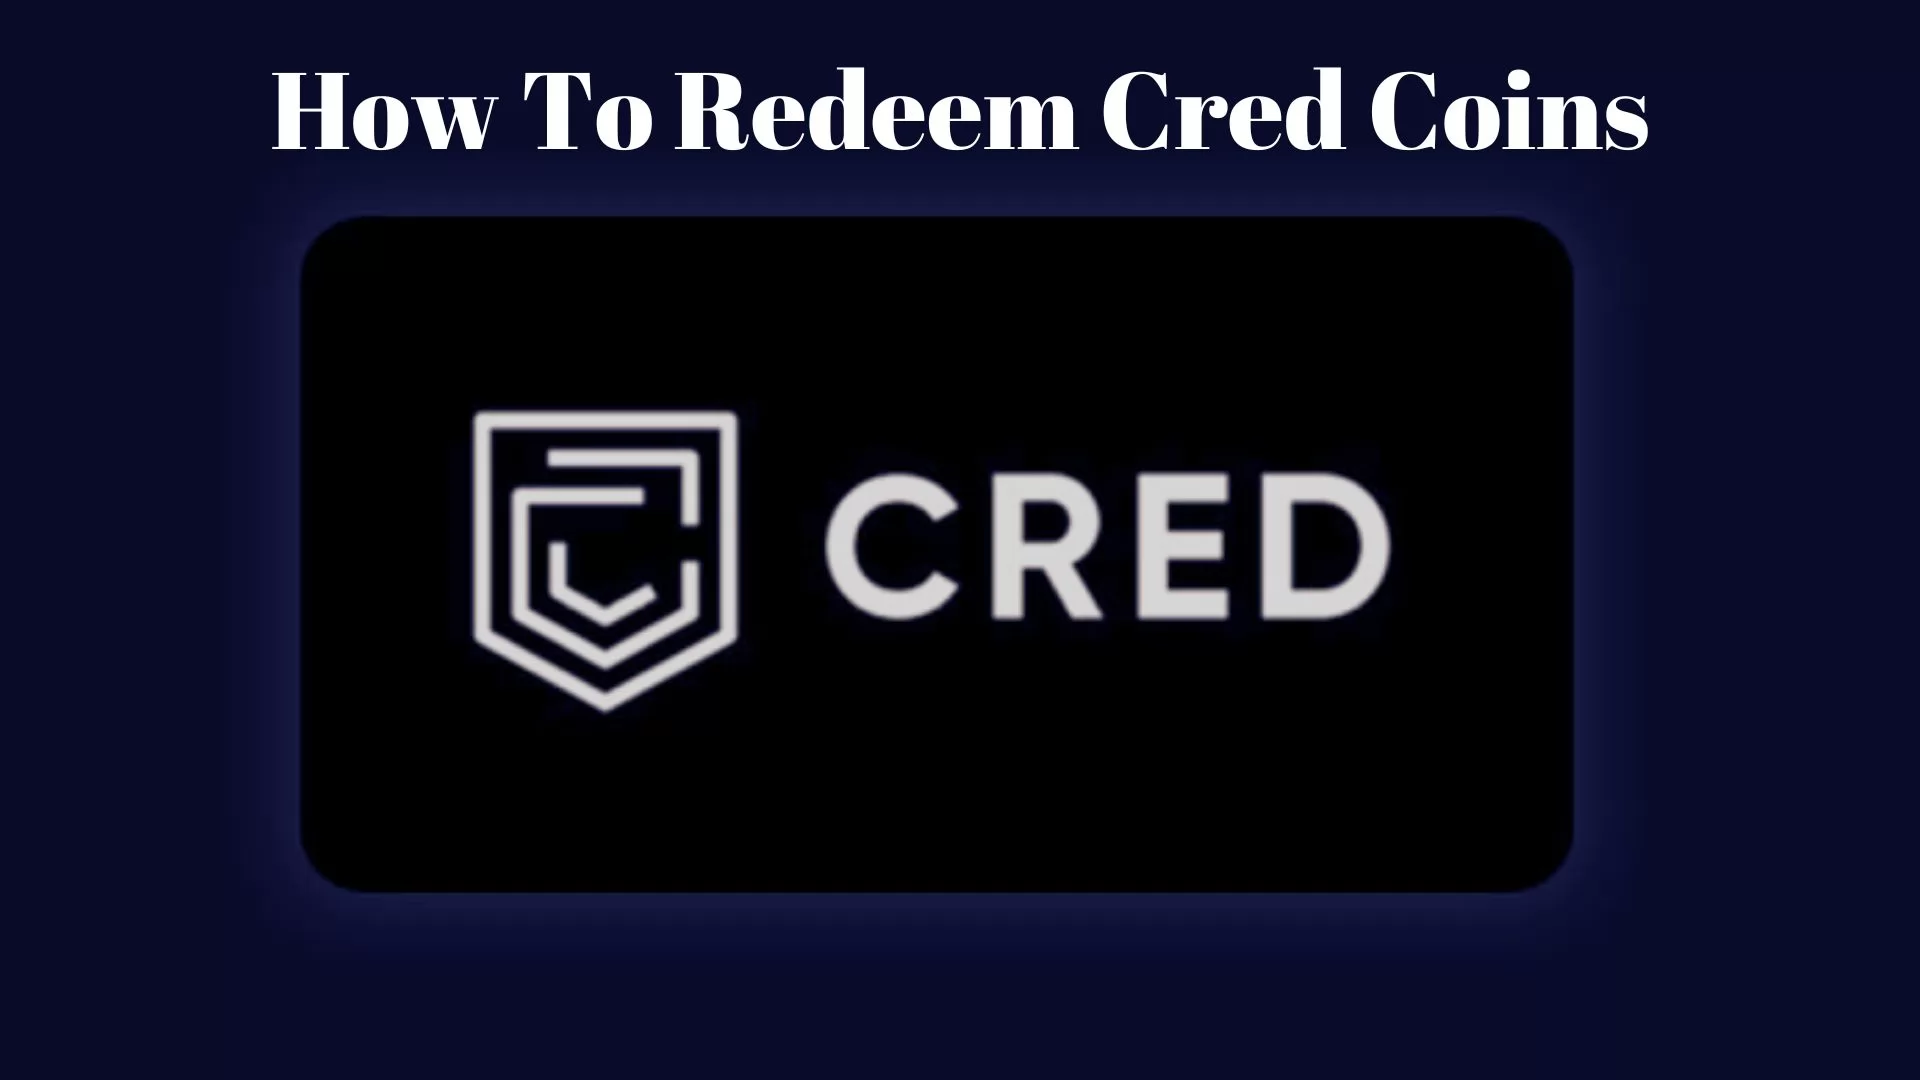 How To Redeem Cred Coins